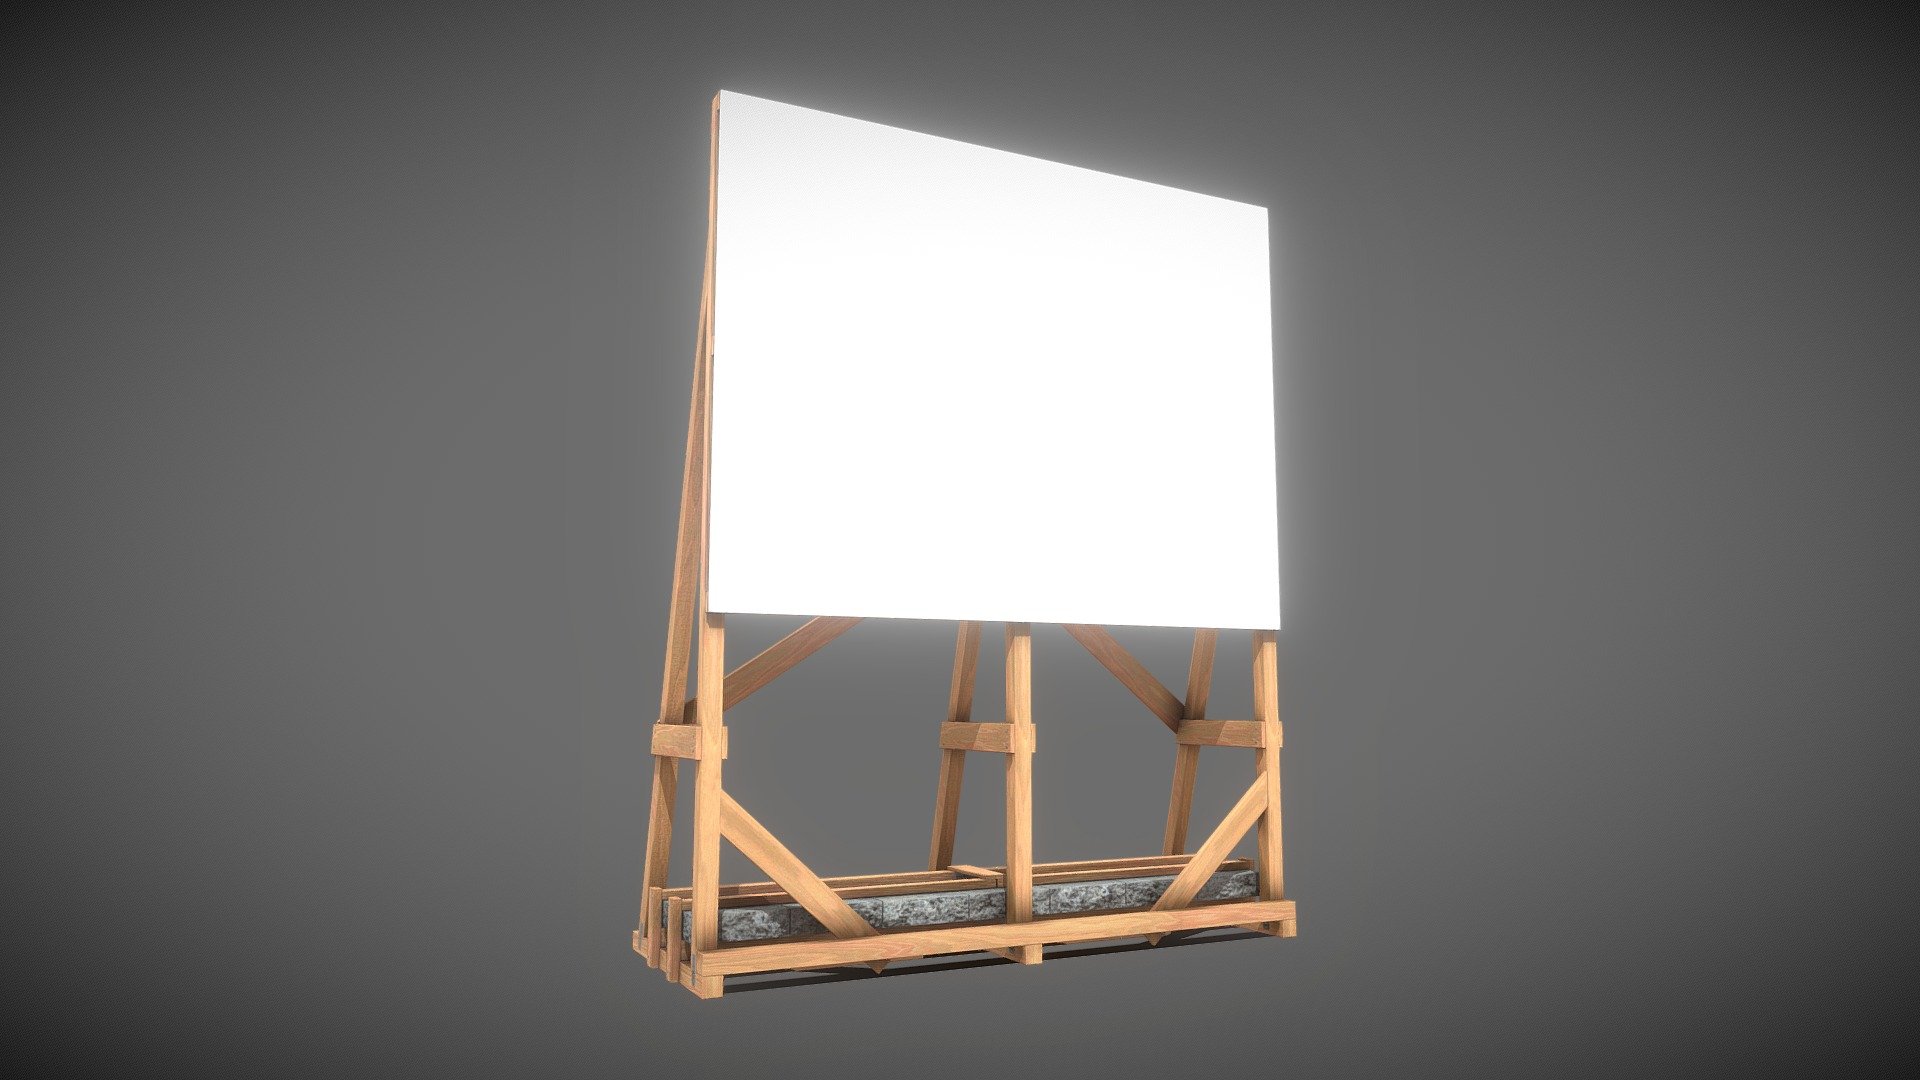 Construction Site Information Board 1






PBR-Textures = 8K






Object Name - Construction_Site_Information_Board_1 

Object Dimensions -  4.097m x 1.552m x 5.031m 






Vertices = 724

Edges = 1268

Polygons = 621



3D model formats: 




Native format (*.blend)

Autodesk FBX (.fbx)

OBJ (.obj, .mtl)

glTF (.gltf, .glb)

X3D (.x3d)

Collada (.dae)

Stereolithography (.stl)

Polygon File Format (.ply)

Alembic (.abc)

DXF (.dxf)

USDC






old version with text





3d-modelled and pbr-textured by 3DHaupt in Blender-2.83.3 - Construction Site Information Board 1 - Buy Royalty Free 3D model by VIS-All-3D (@VIS-All) 3d model